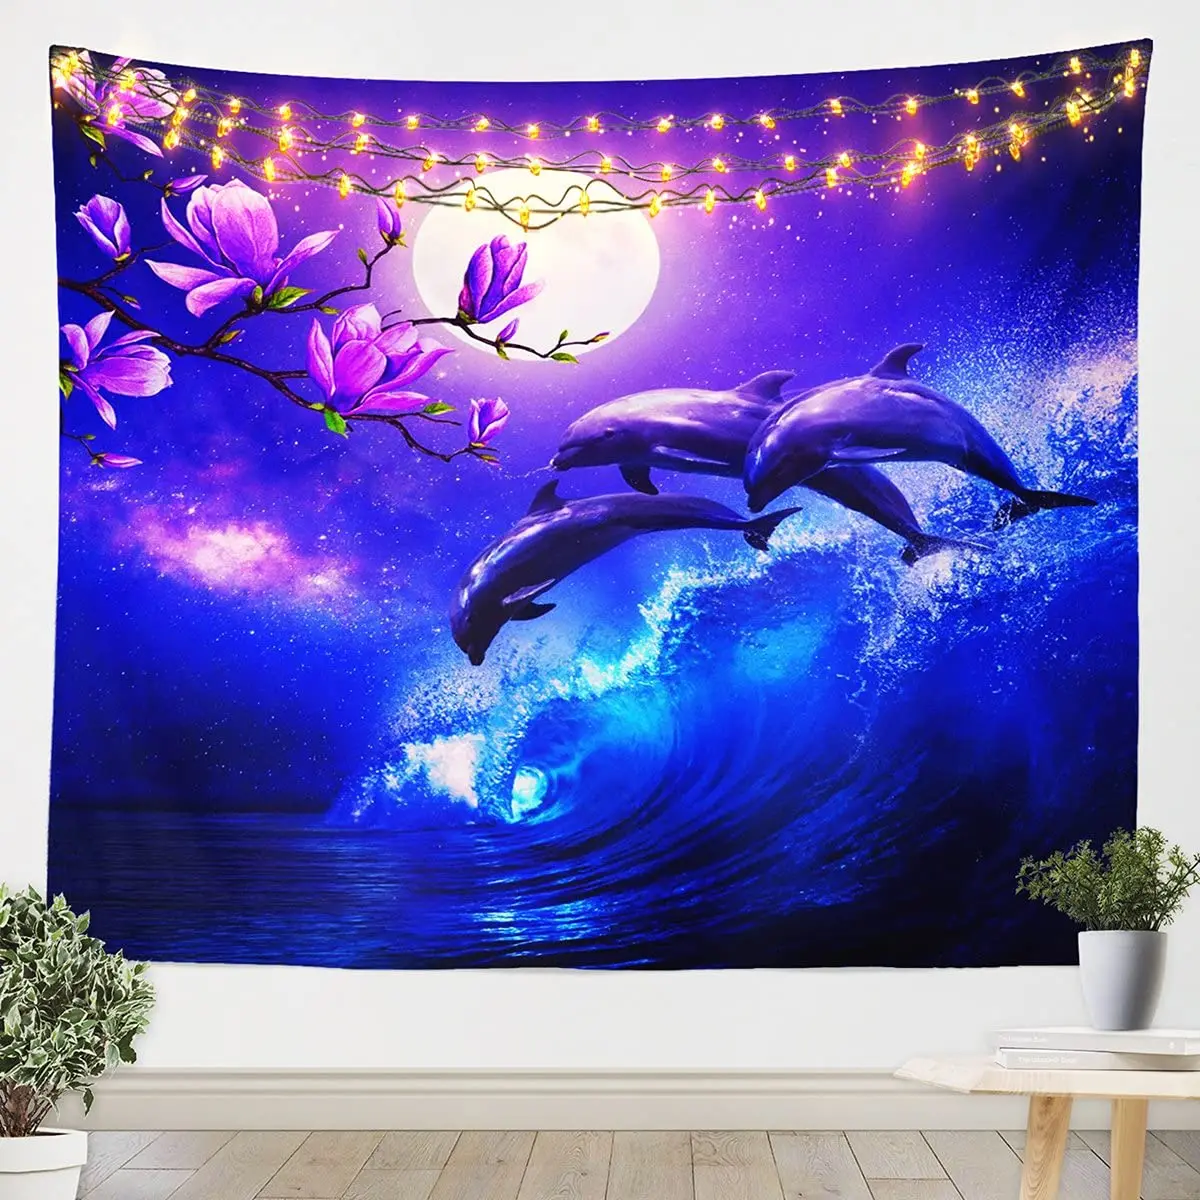 

Galaxy Dolphin Tapestry Coastal Ocean Waves Tapestry Wall Hanging Cherry Blossoms Sea Animal Tapestries Moon Sky Starry Blanket